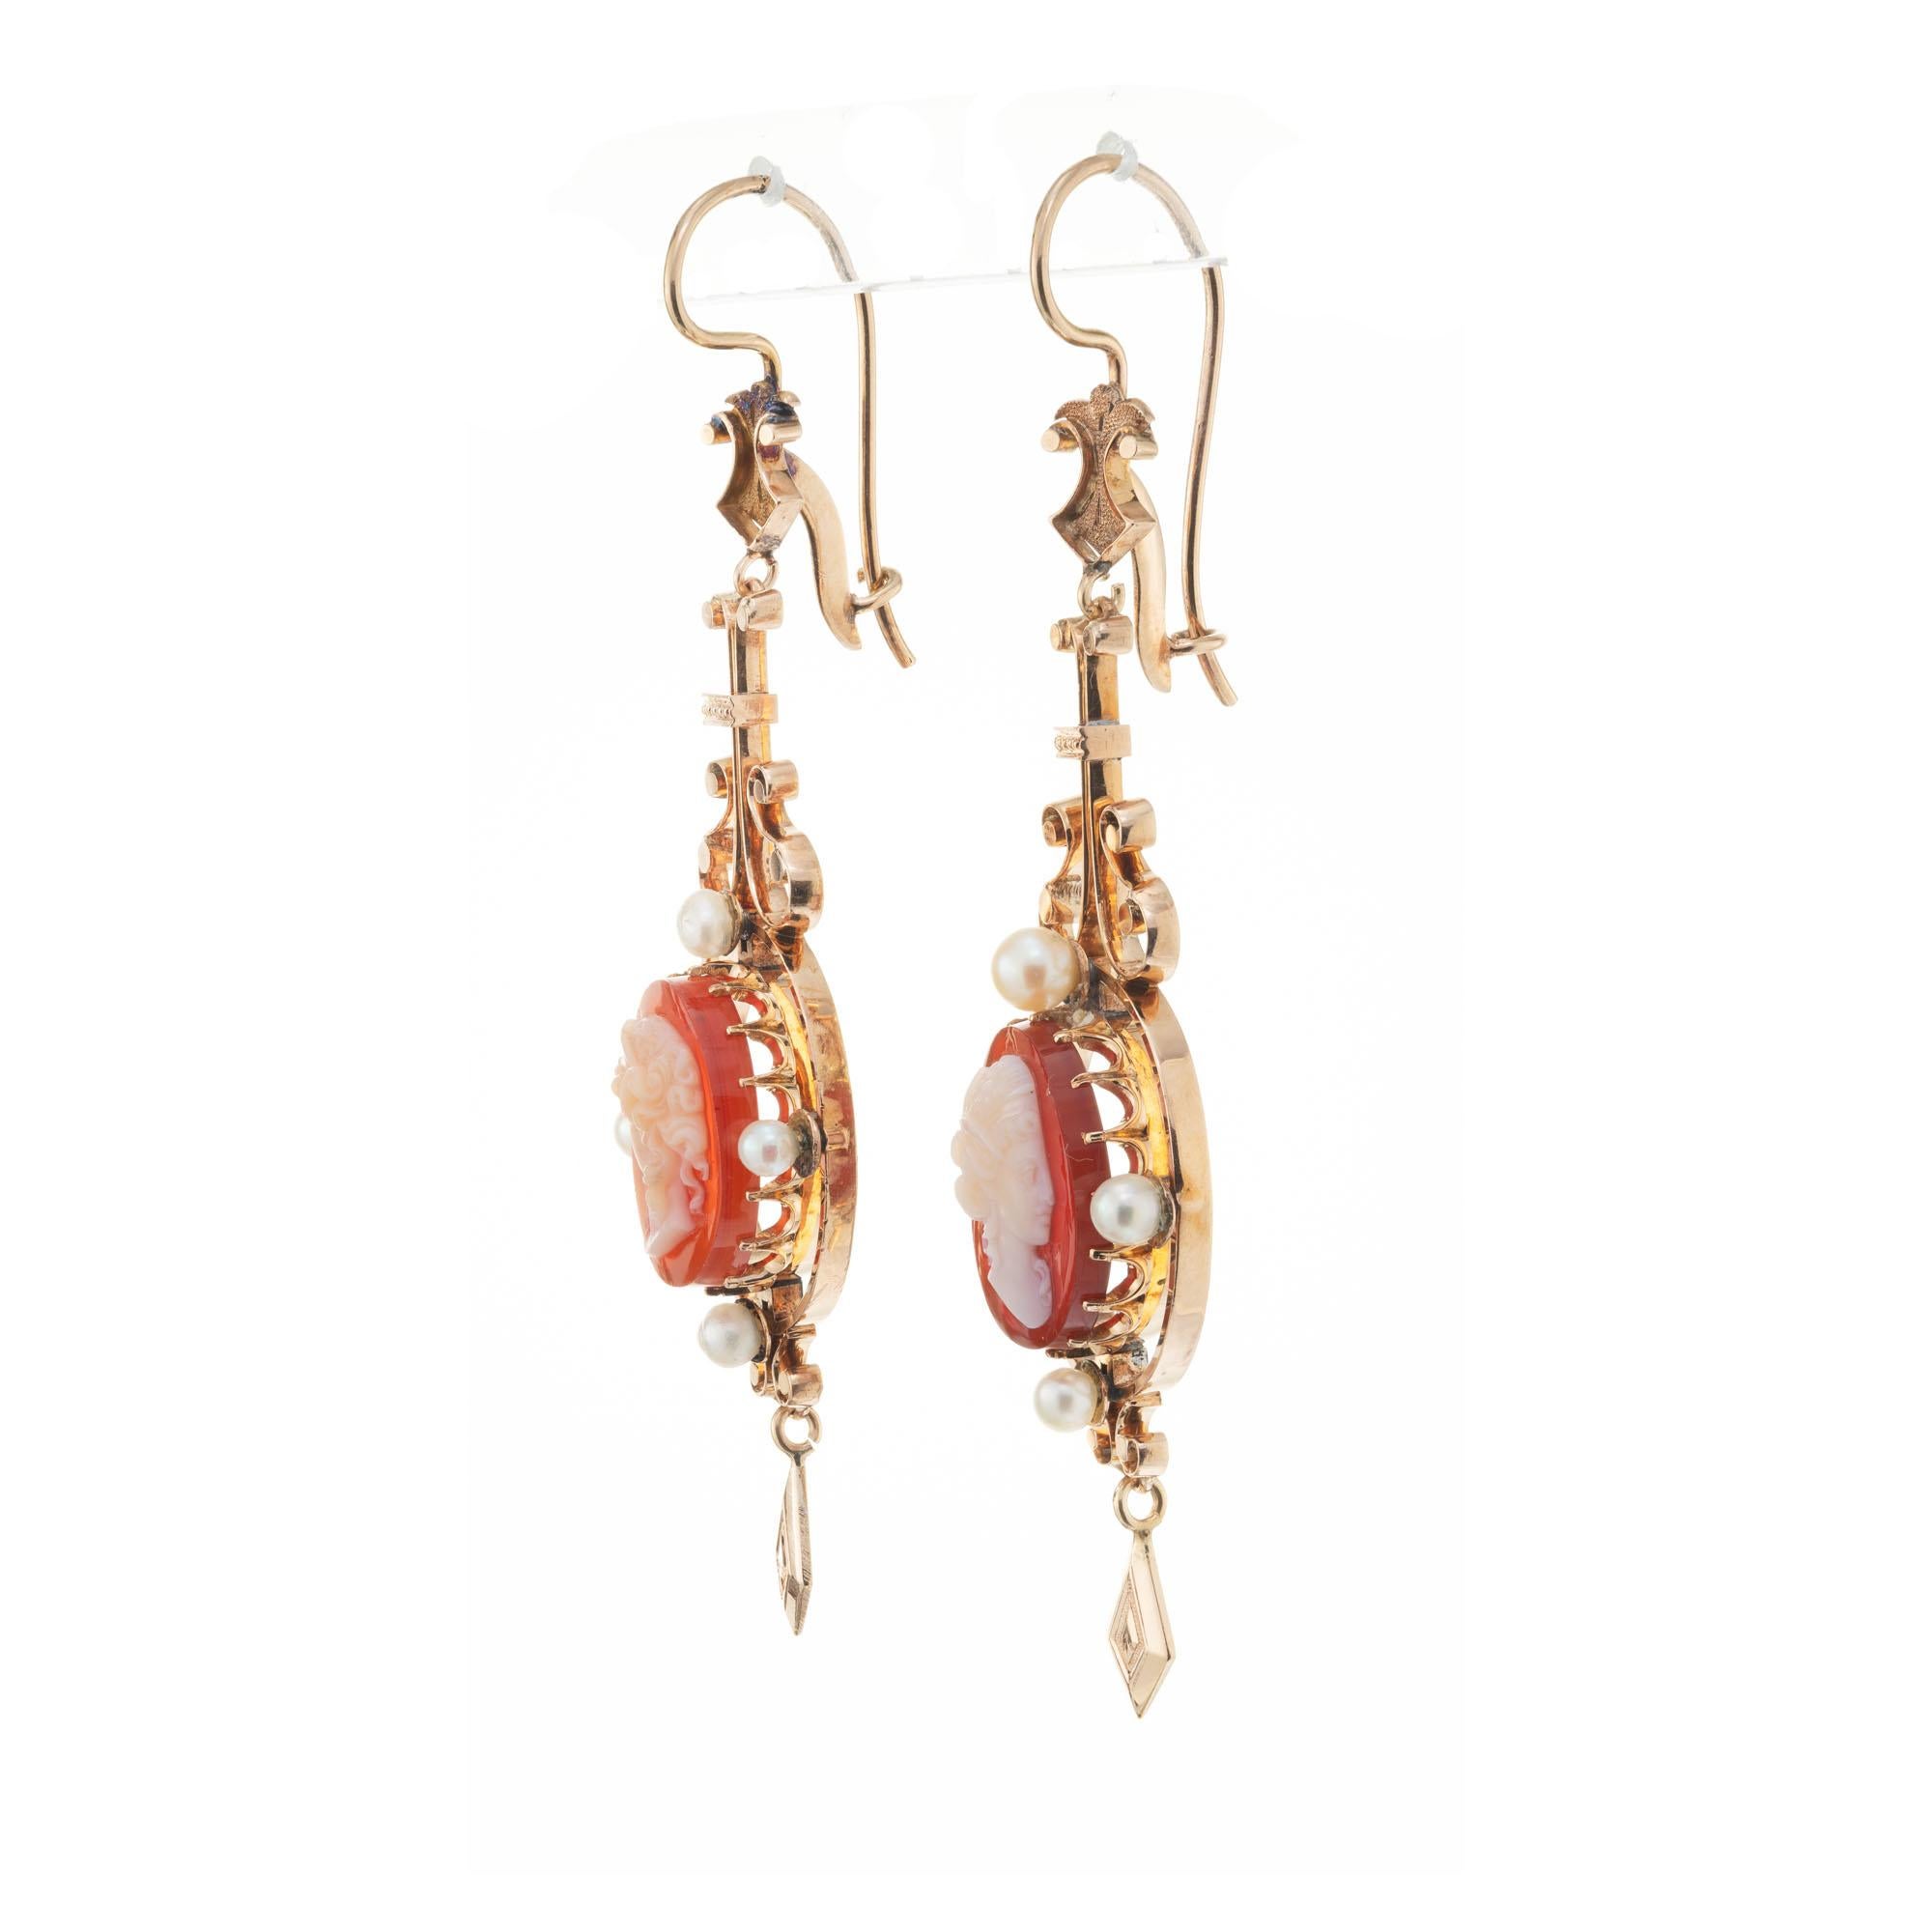 Pendant dangle style 1900’s 15k rose gold carved hardstone cameo dangle earrings with natural pearl accents, one or two may have been replaced with cultured pearls.

2 crème orange brown hardstone cameos
8 gray crème pearls, 3.4mm
15k rose gold 
15k